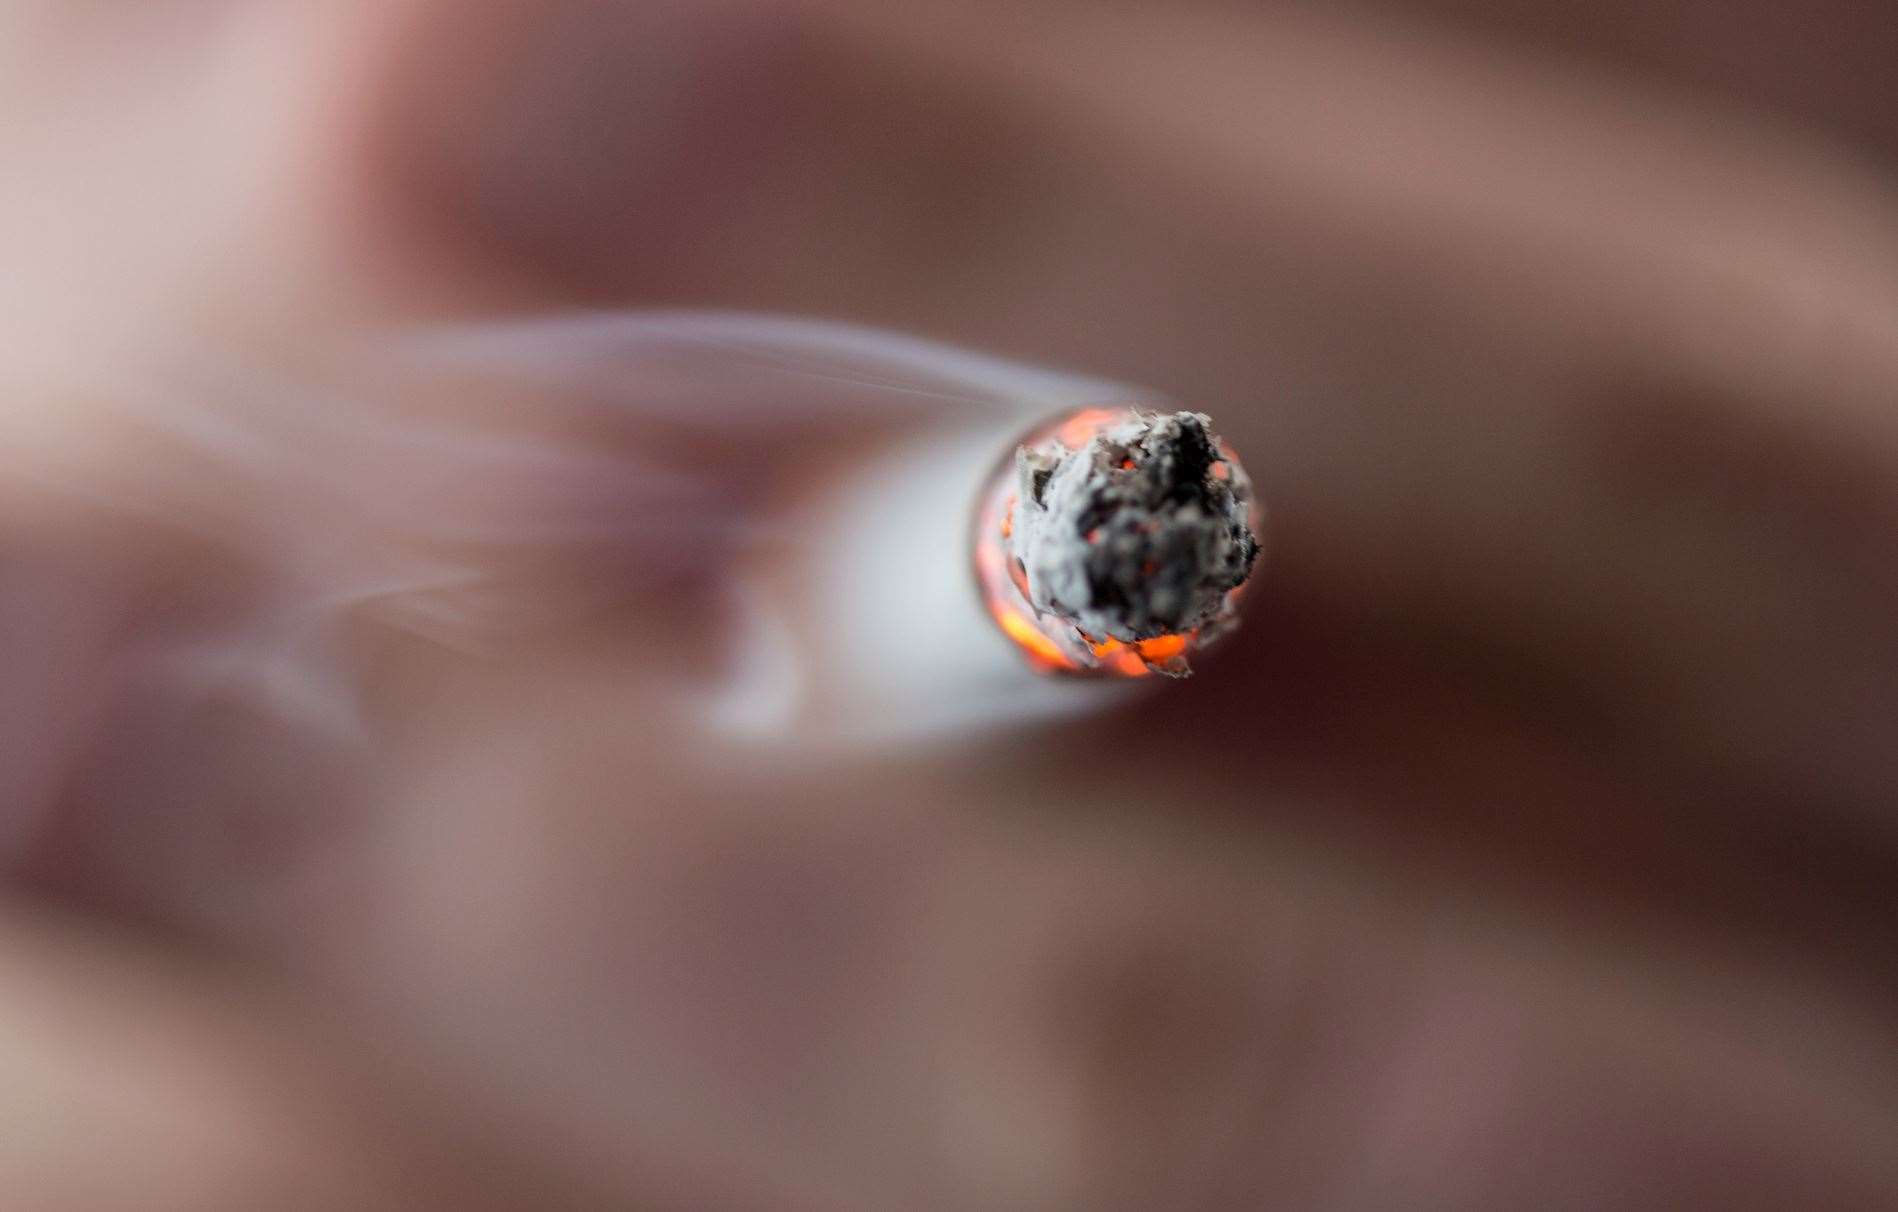 Smoking – one of the world’s strangest habits when you look objectively at it